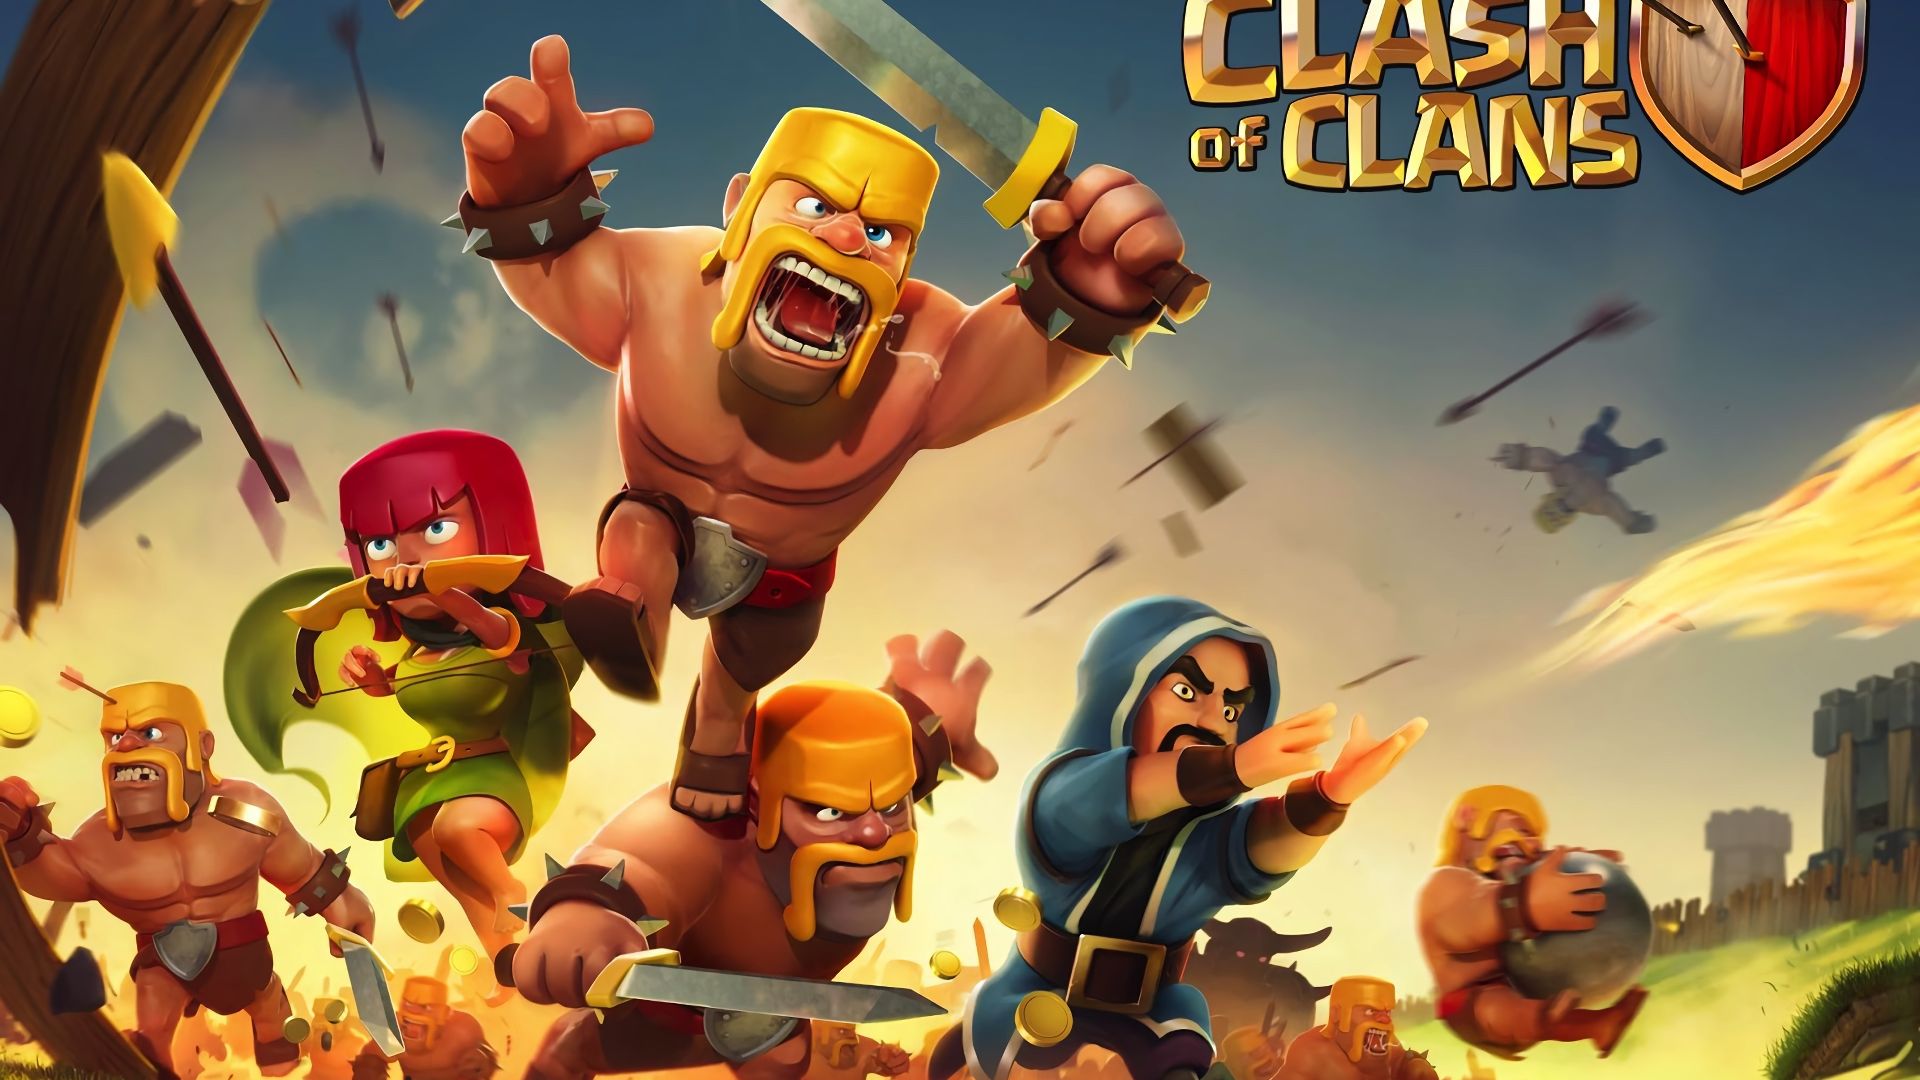 Wallpaper Clash of clans, magician, barbarian, archers, poster, game